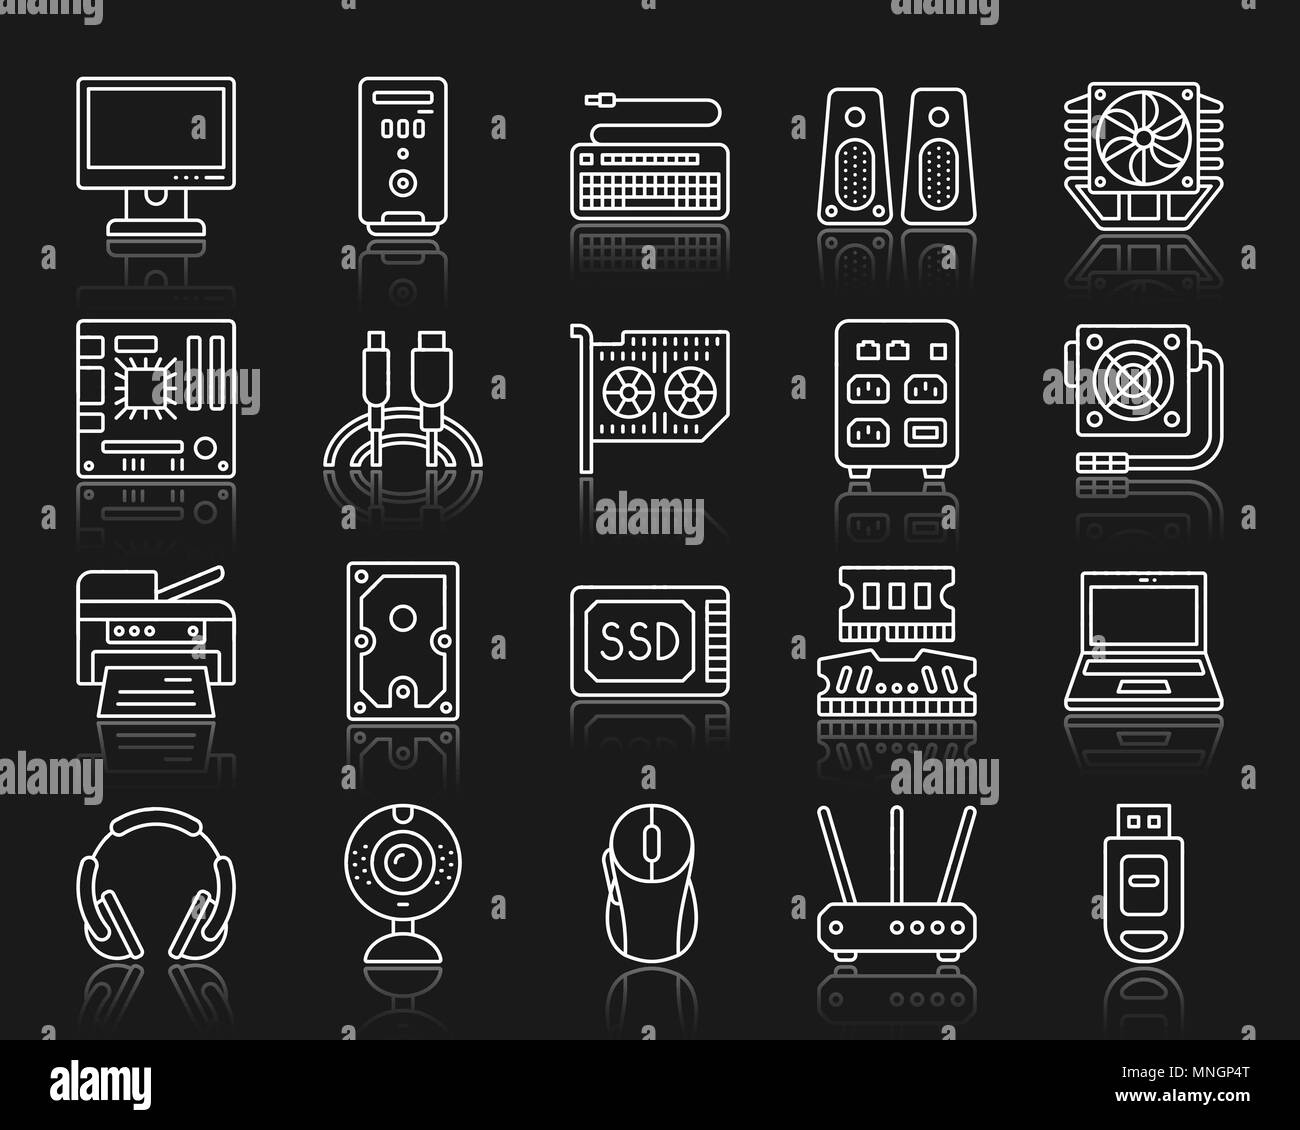 Computer thin line icons set. Outline web sign kit of electronics. Gadget linear icon collection includes laptop, modem, headphones. Simple computer s Stock Vector